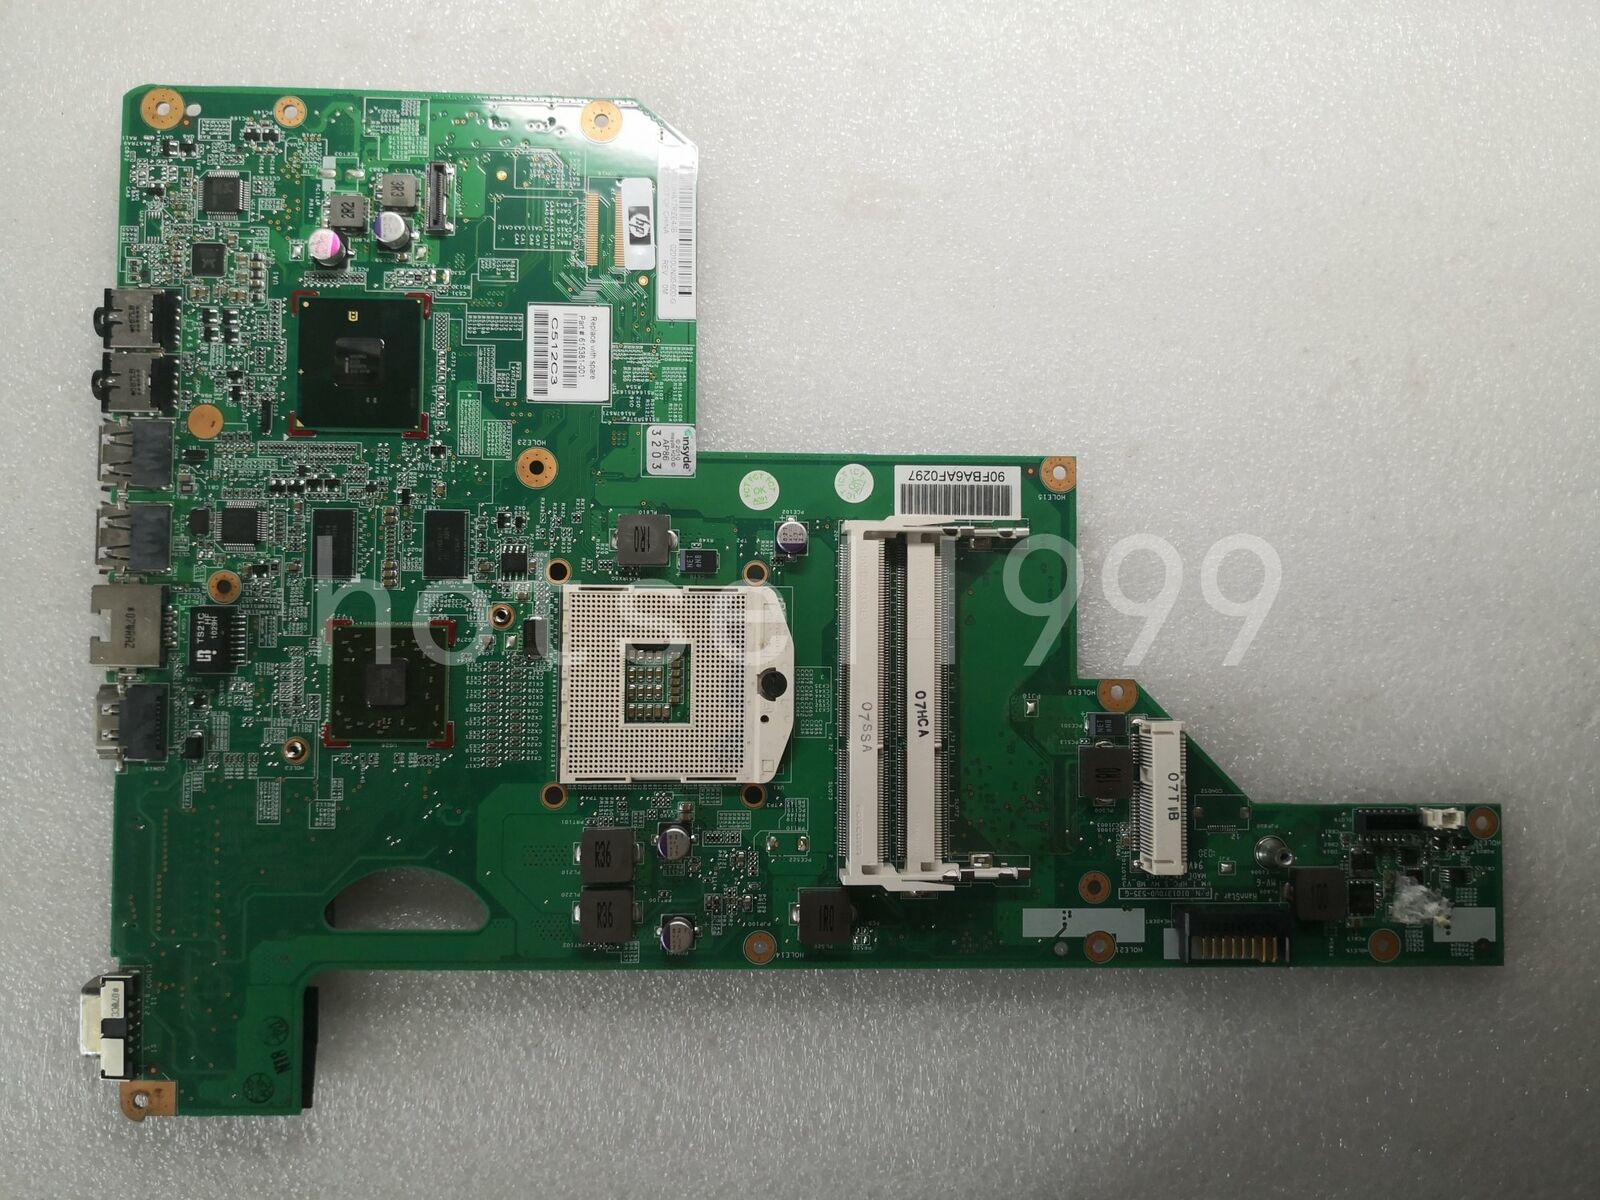 For HP G62 G72 Laptop Motherboard HM55 DDR3 SLGZS CPU 615381-001 tested OK Brand: HP Number of Memory Slot